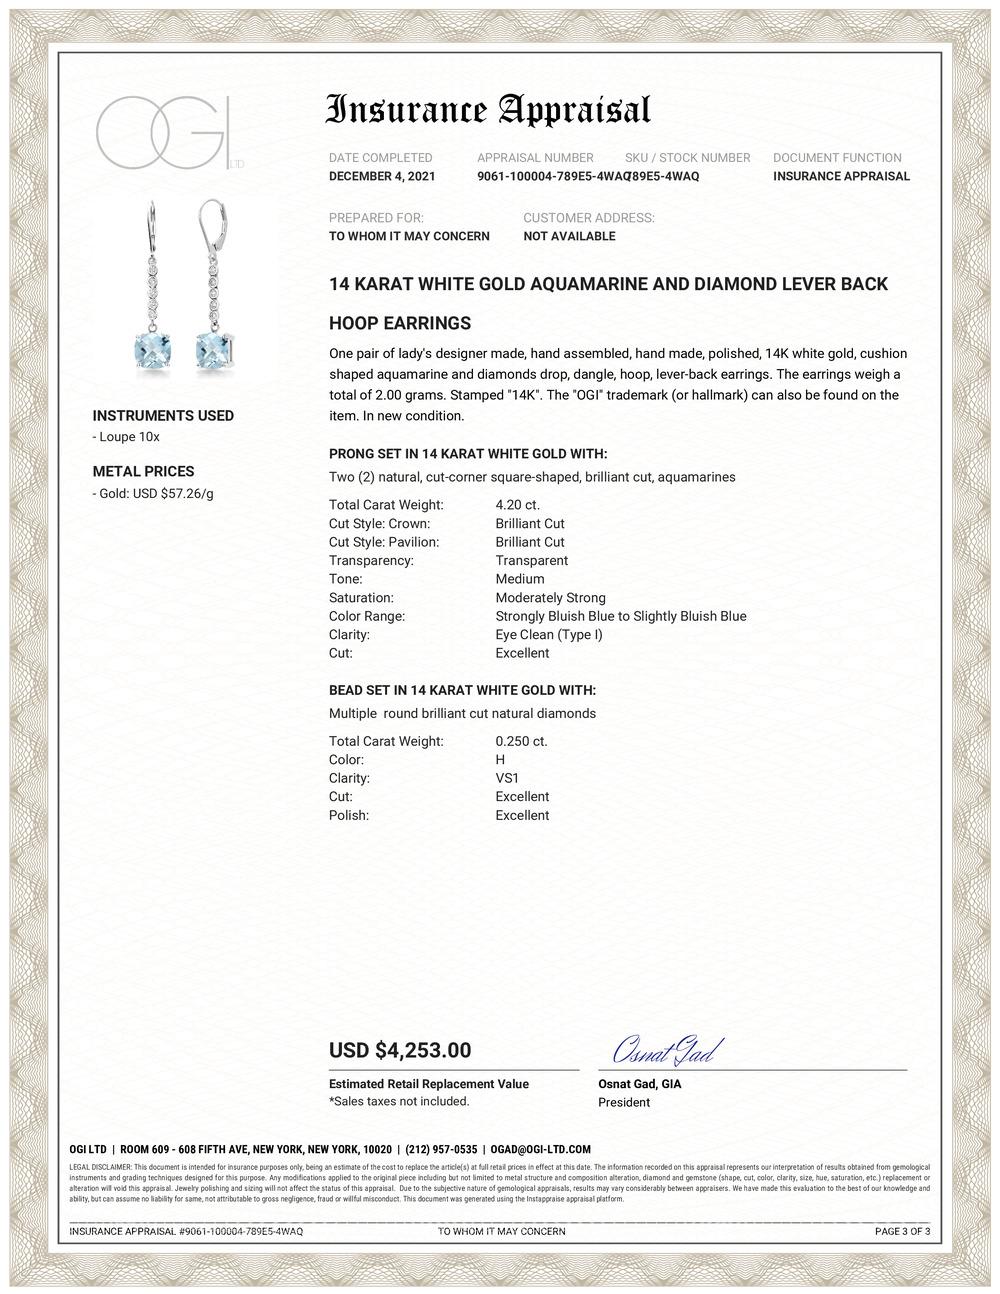 Fourteen karat white gold aquamarine and diamond hoop drop earrings 
Round Diamond weighing 0.25 carat
Aquamarine weighing 4.20 carat 
Aquamarine measuring 8x8 millimeter
New Earrings
Handmade in USA
Gold earrings are hanging off a diamond lever